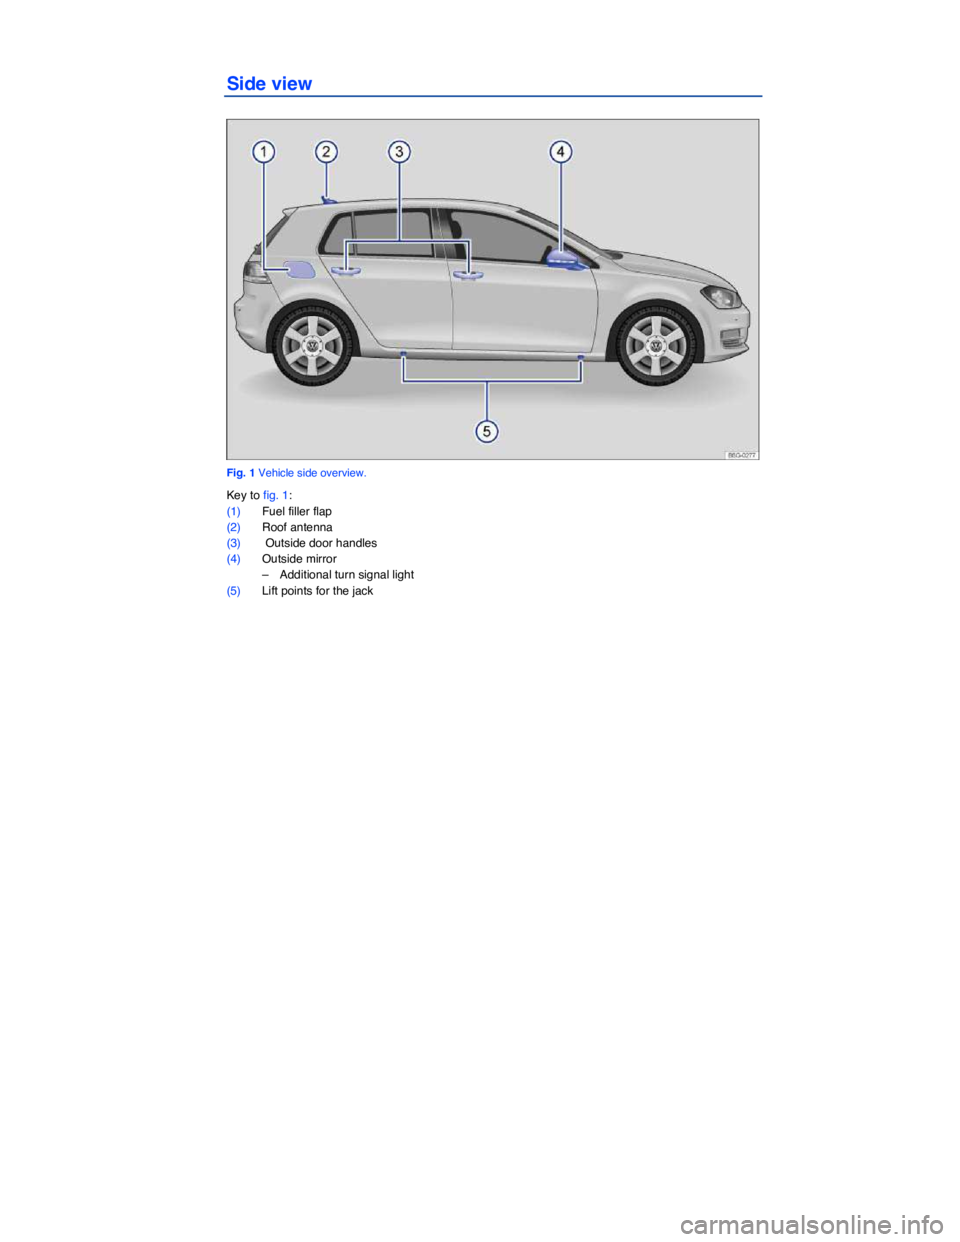 VOLKSWAGEN SCIROCCO 2015  Owner´s Manual   
Side view 
 
Fig. 1 Vehicle side overview. 
Key to fig. 1: 
(1) Fuel filler flap 
(2) Roof antenna  
(3)  Outside door handles  
(4) Outside mirror  
–  Additional turn signal light  
(5) Lift po